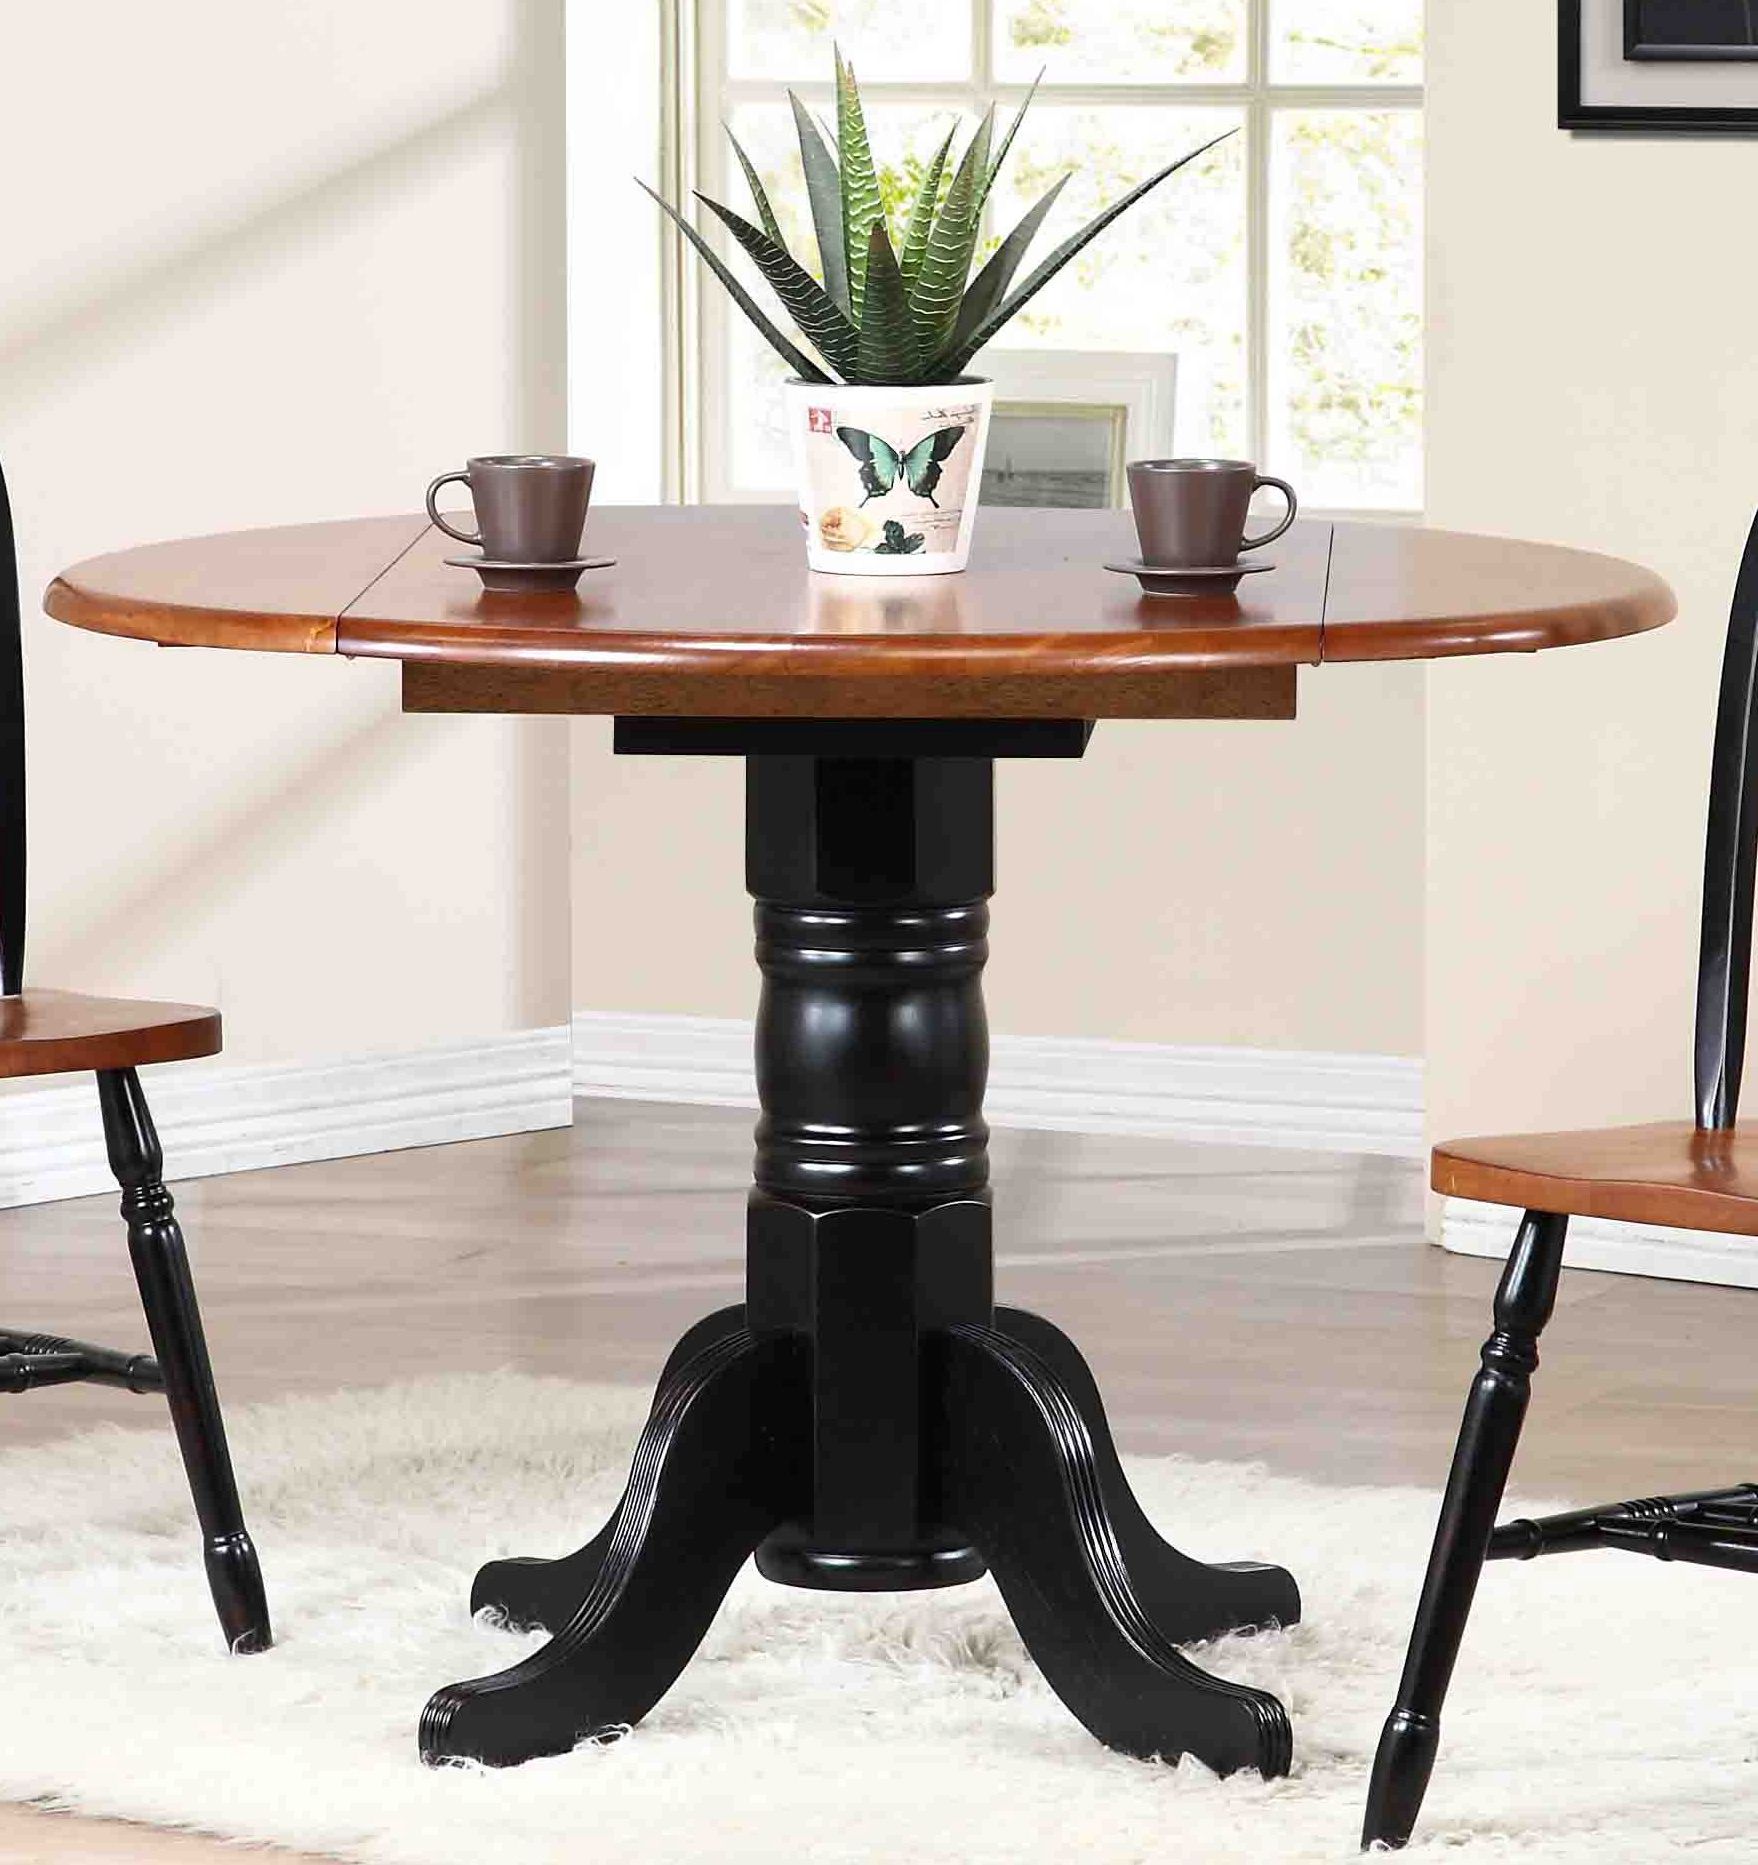 Favorite Transitional 4 Seating Double Drop Leaf Casual Dining Tables Intended For Dlu Tpd4242 Bch (View 15 of 30)